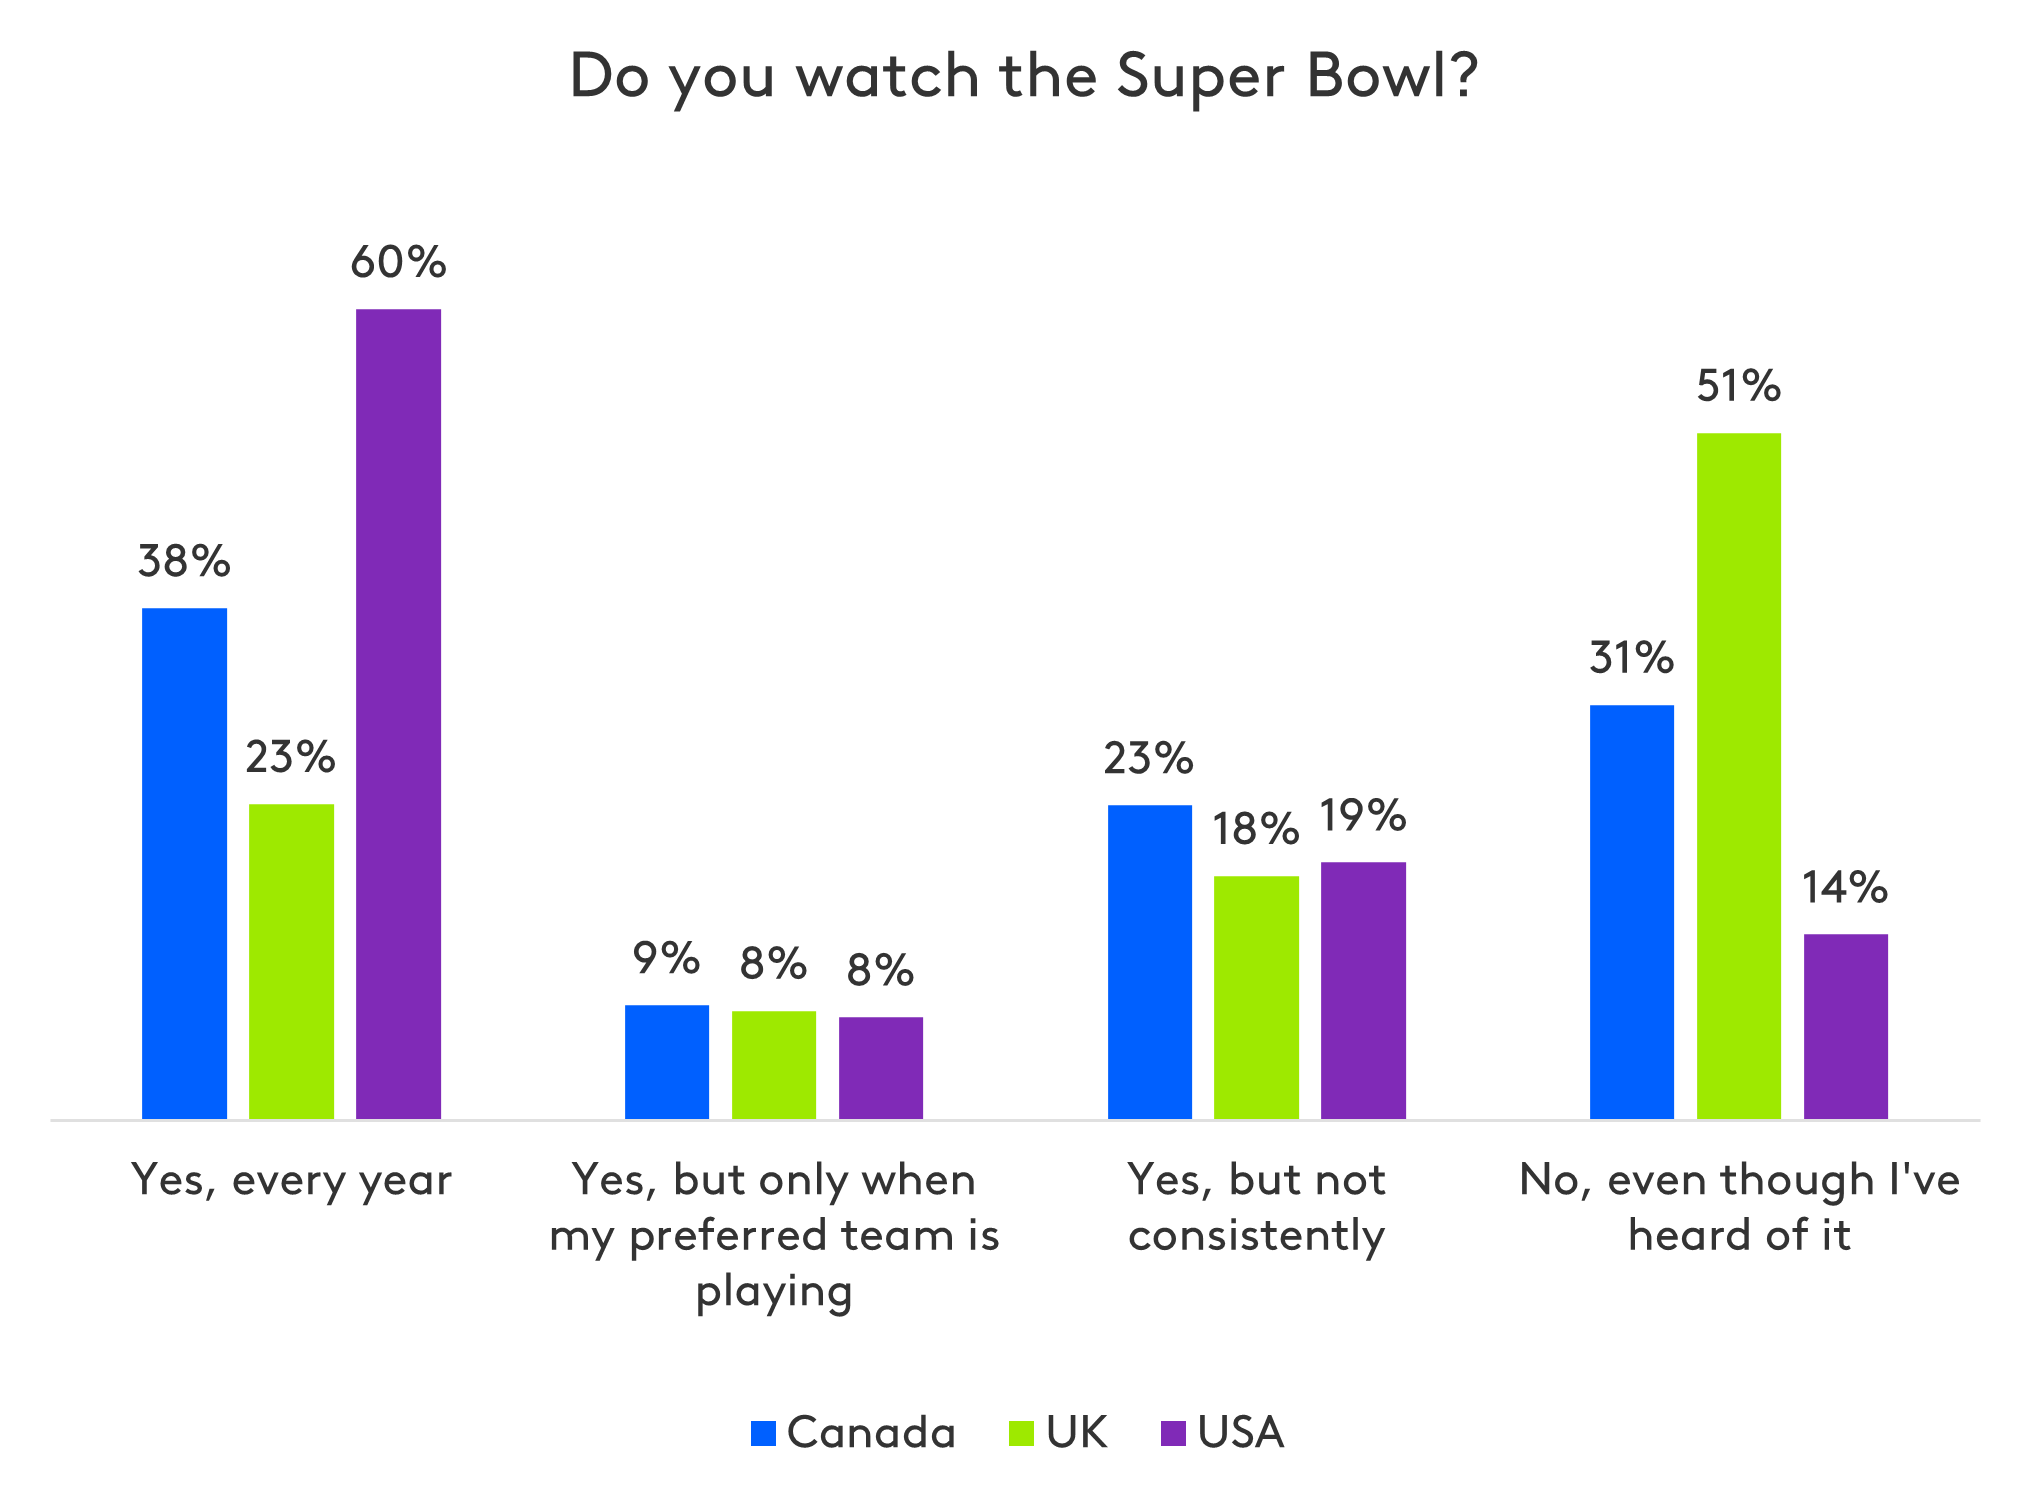 Is the Super Bowl a global event?